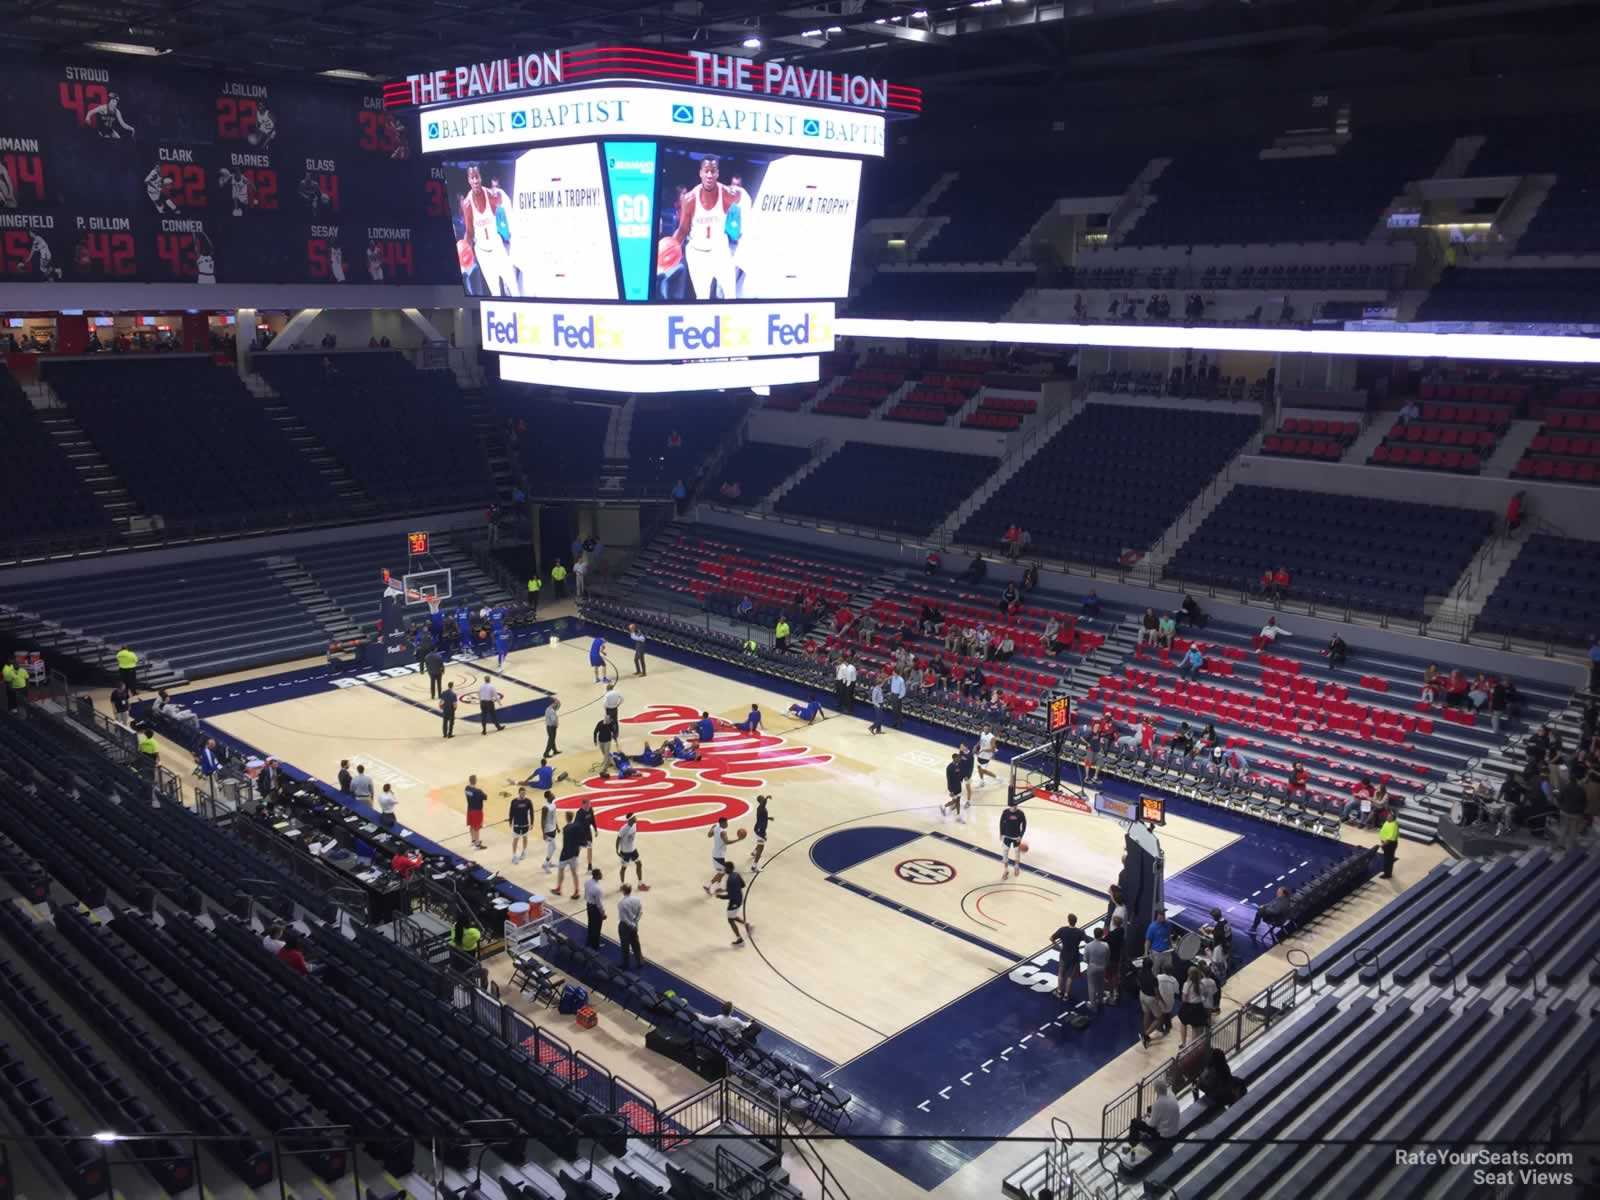 Pavilion at Ole Miss Section 212 - RateYourSeats.com